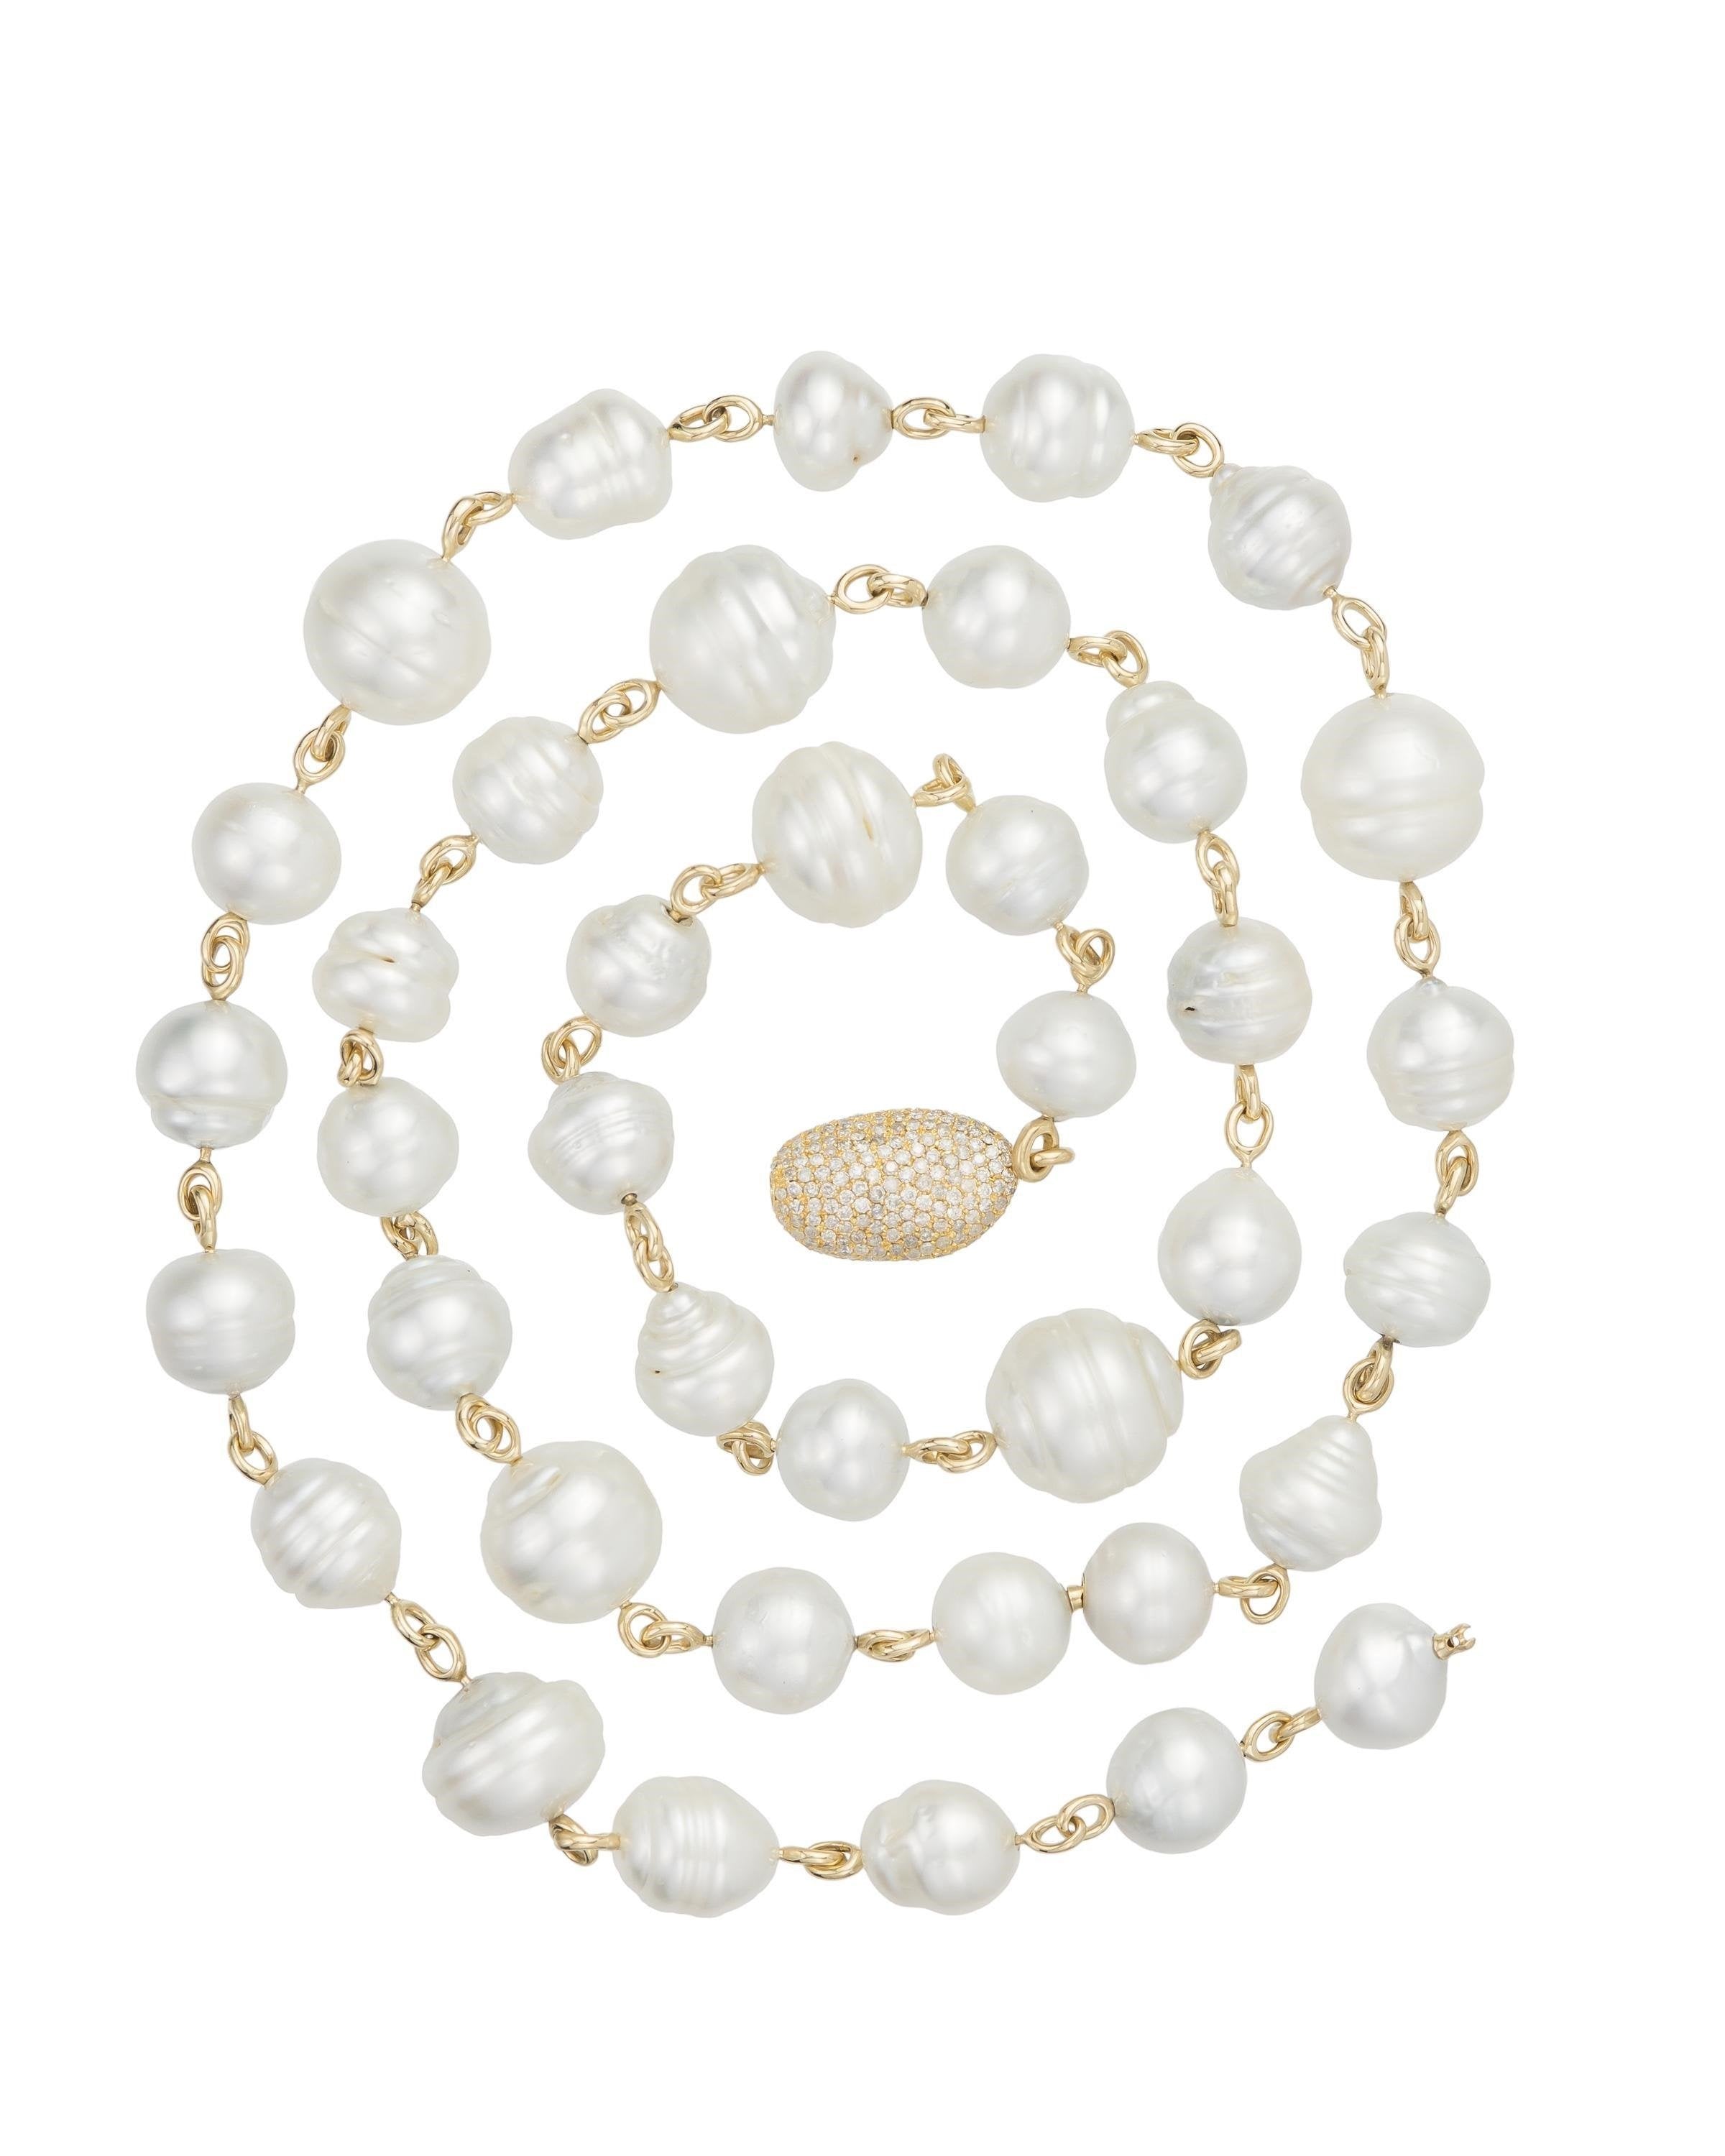 South Sea pearl and diamond pebble necklace, crafted in 18 karat yellow gold chain.